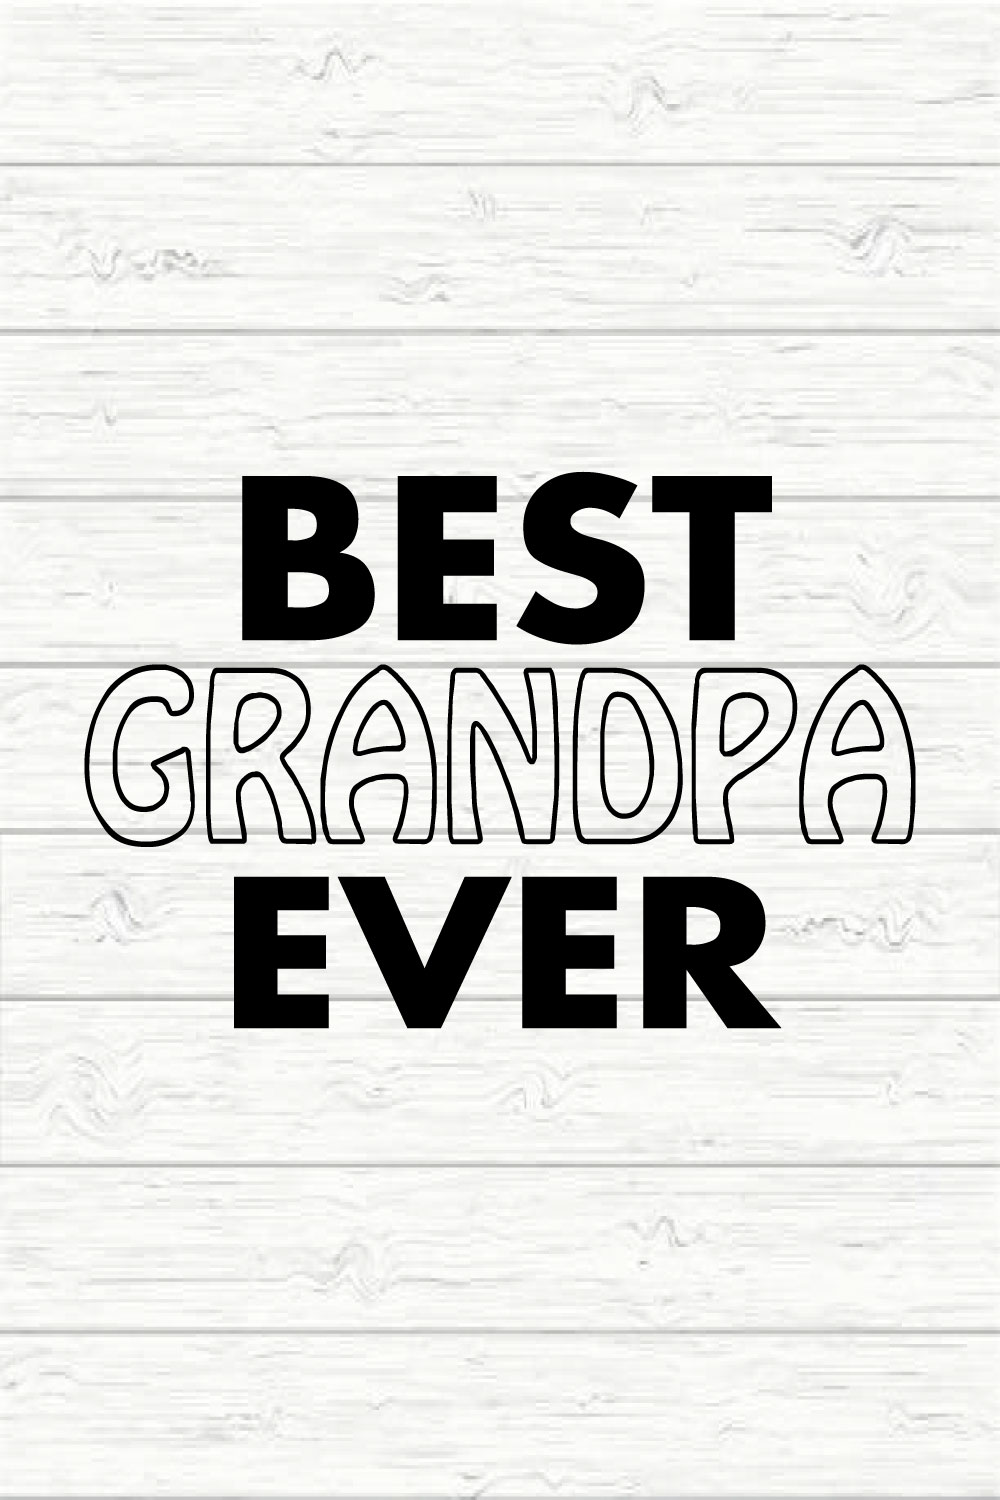 Best grandpa ever pinterest preview image.